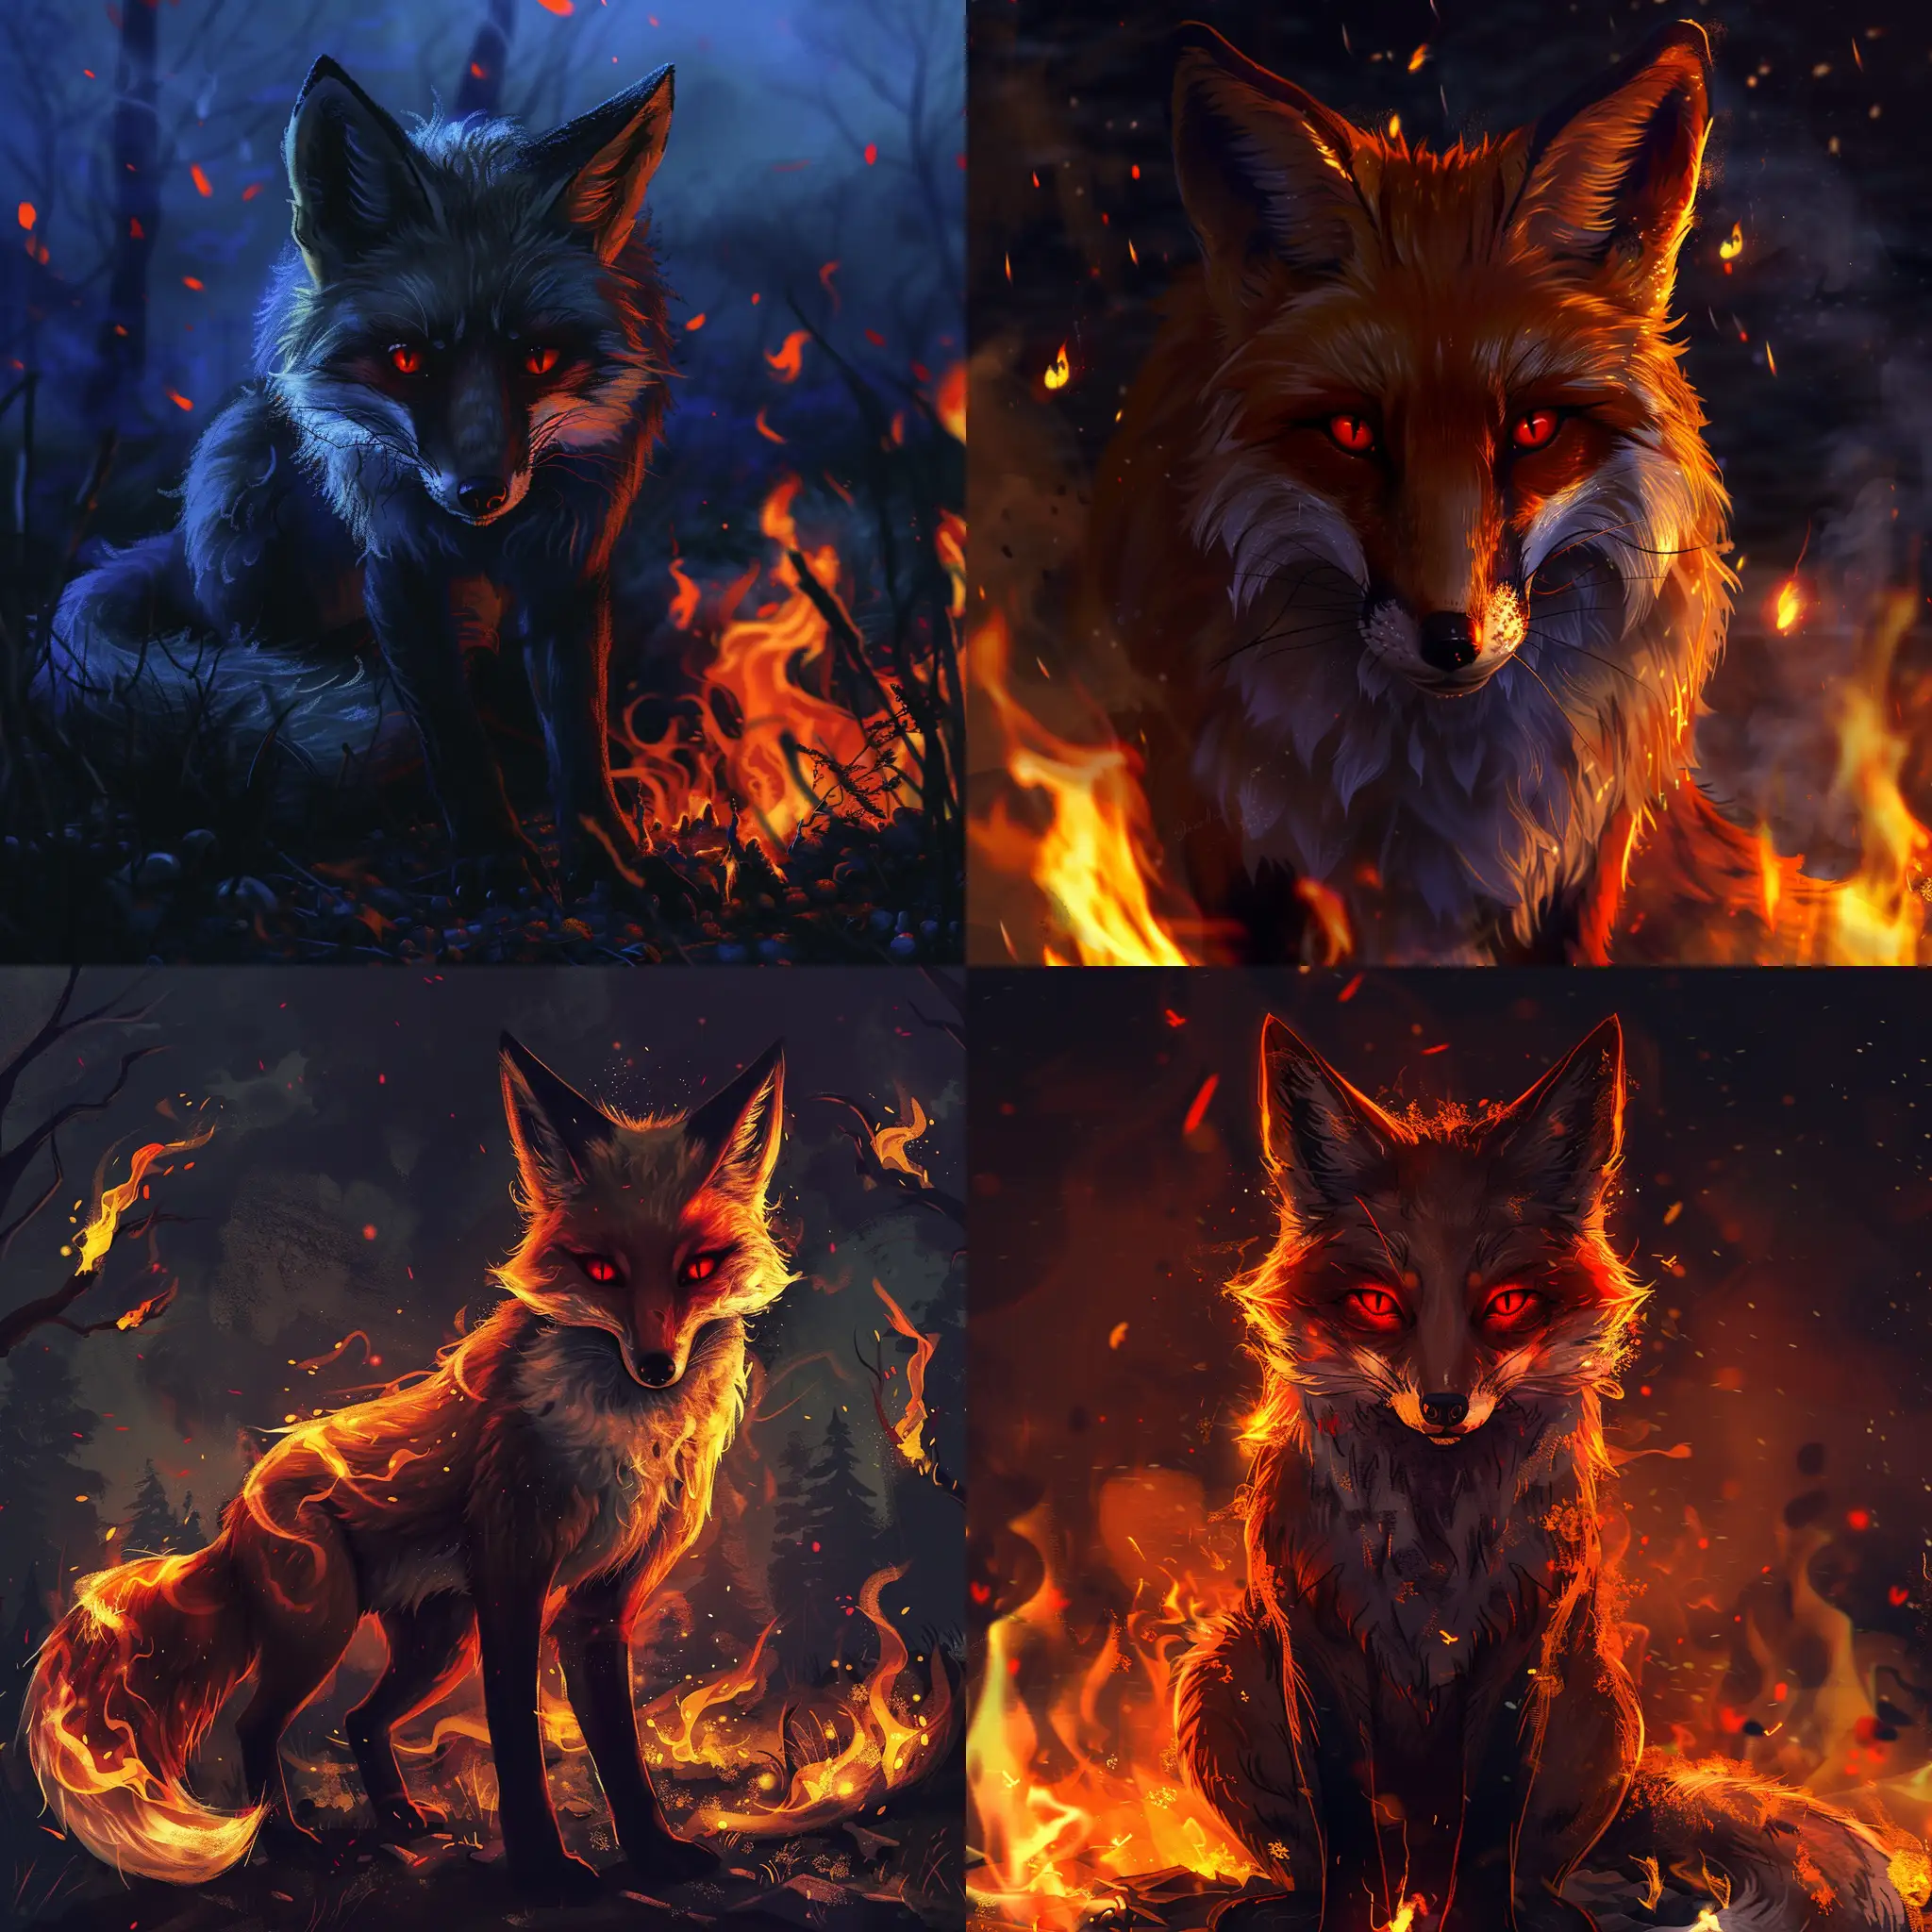 Fire elemental Fox, flames in the background, night, red eyes, 9 tails